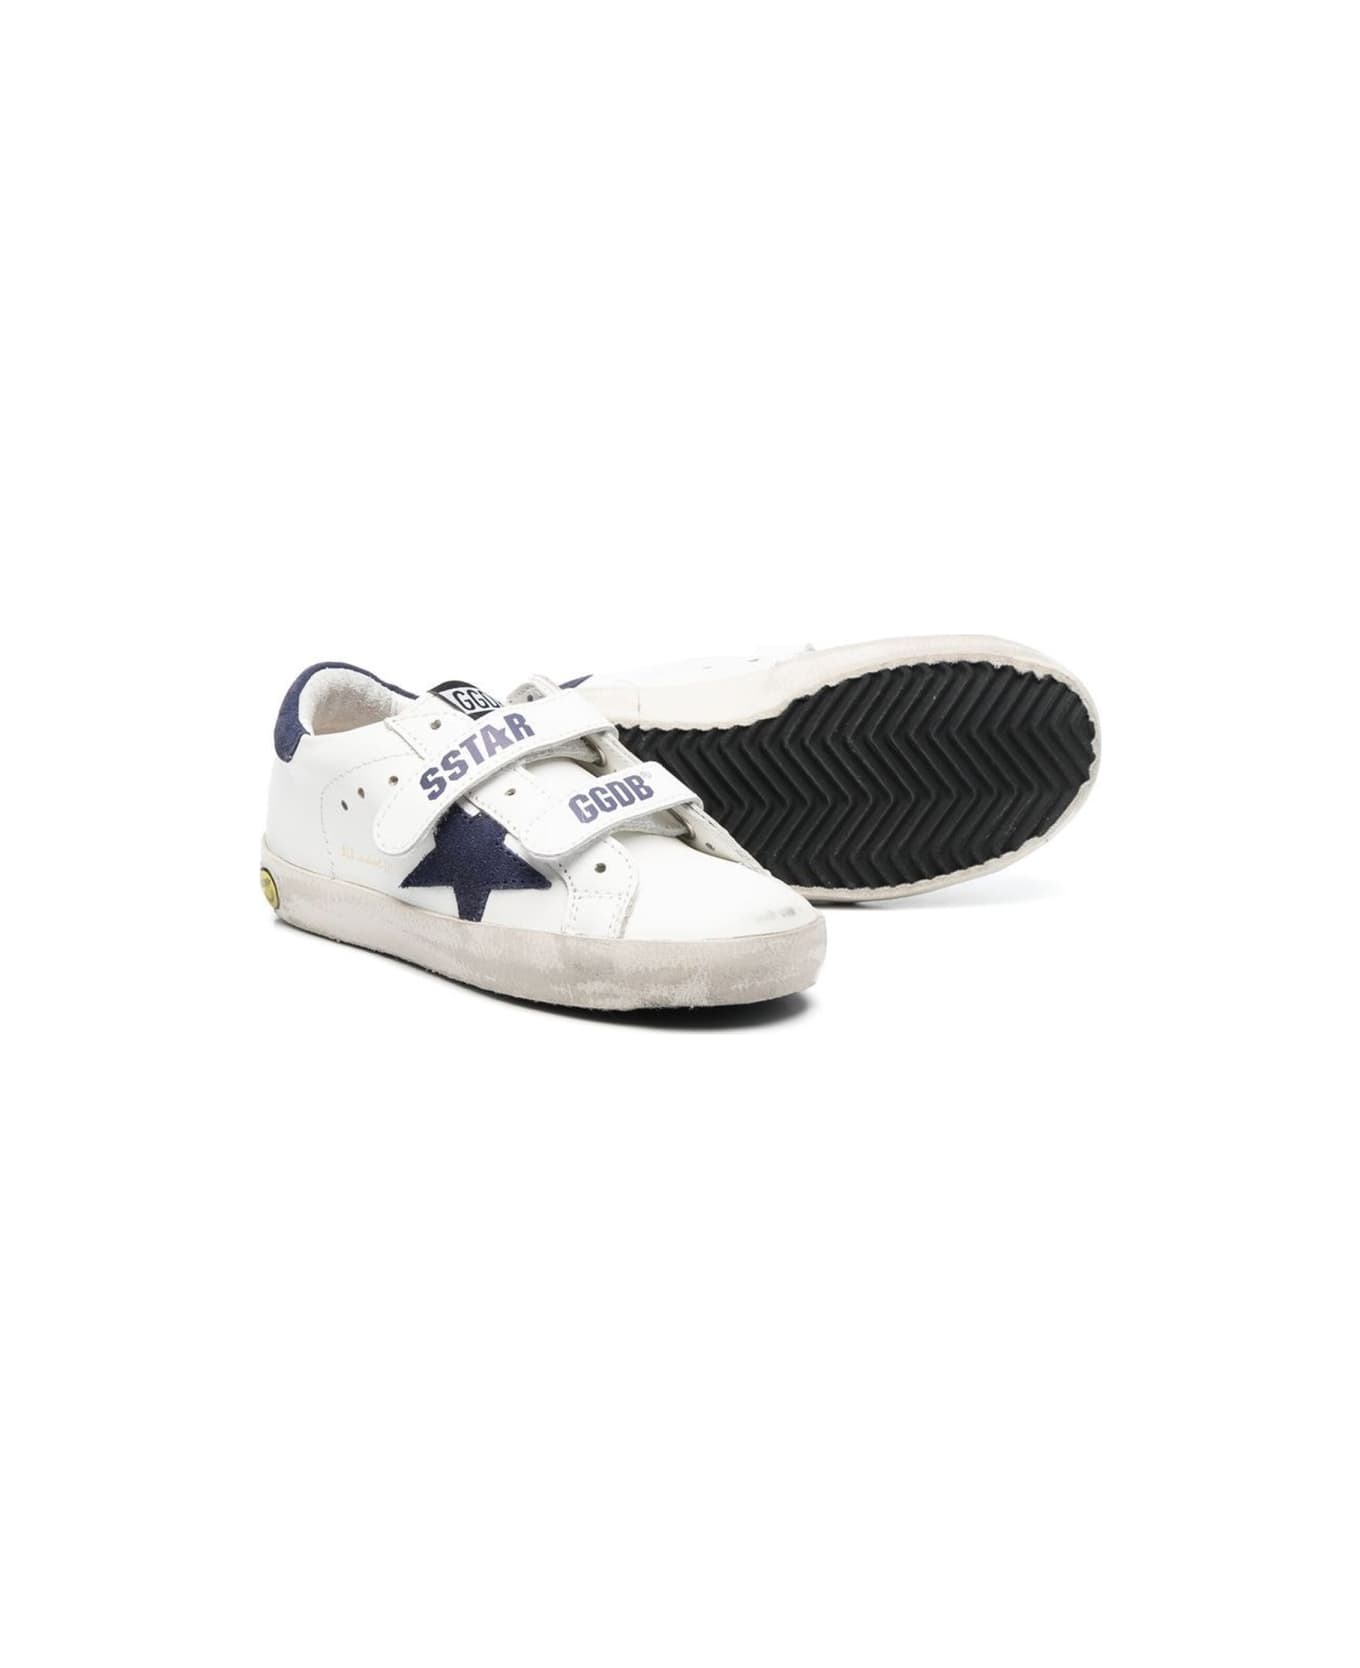 Golden Goose Old School Leather Upper Suede Star And Heel - WHITE